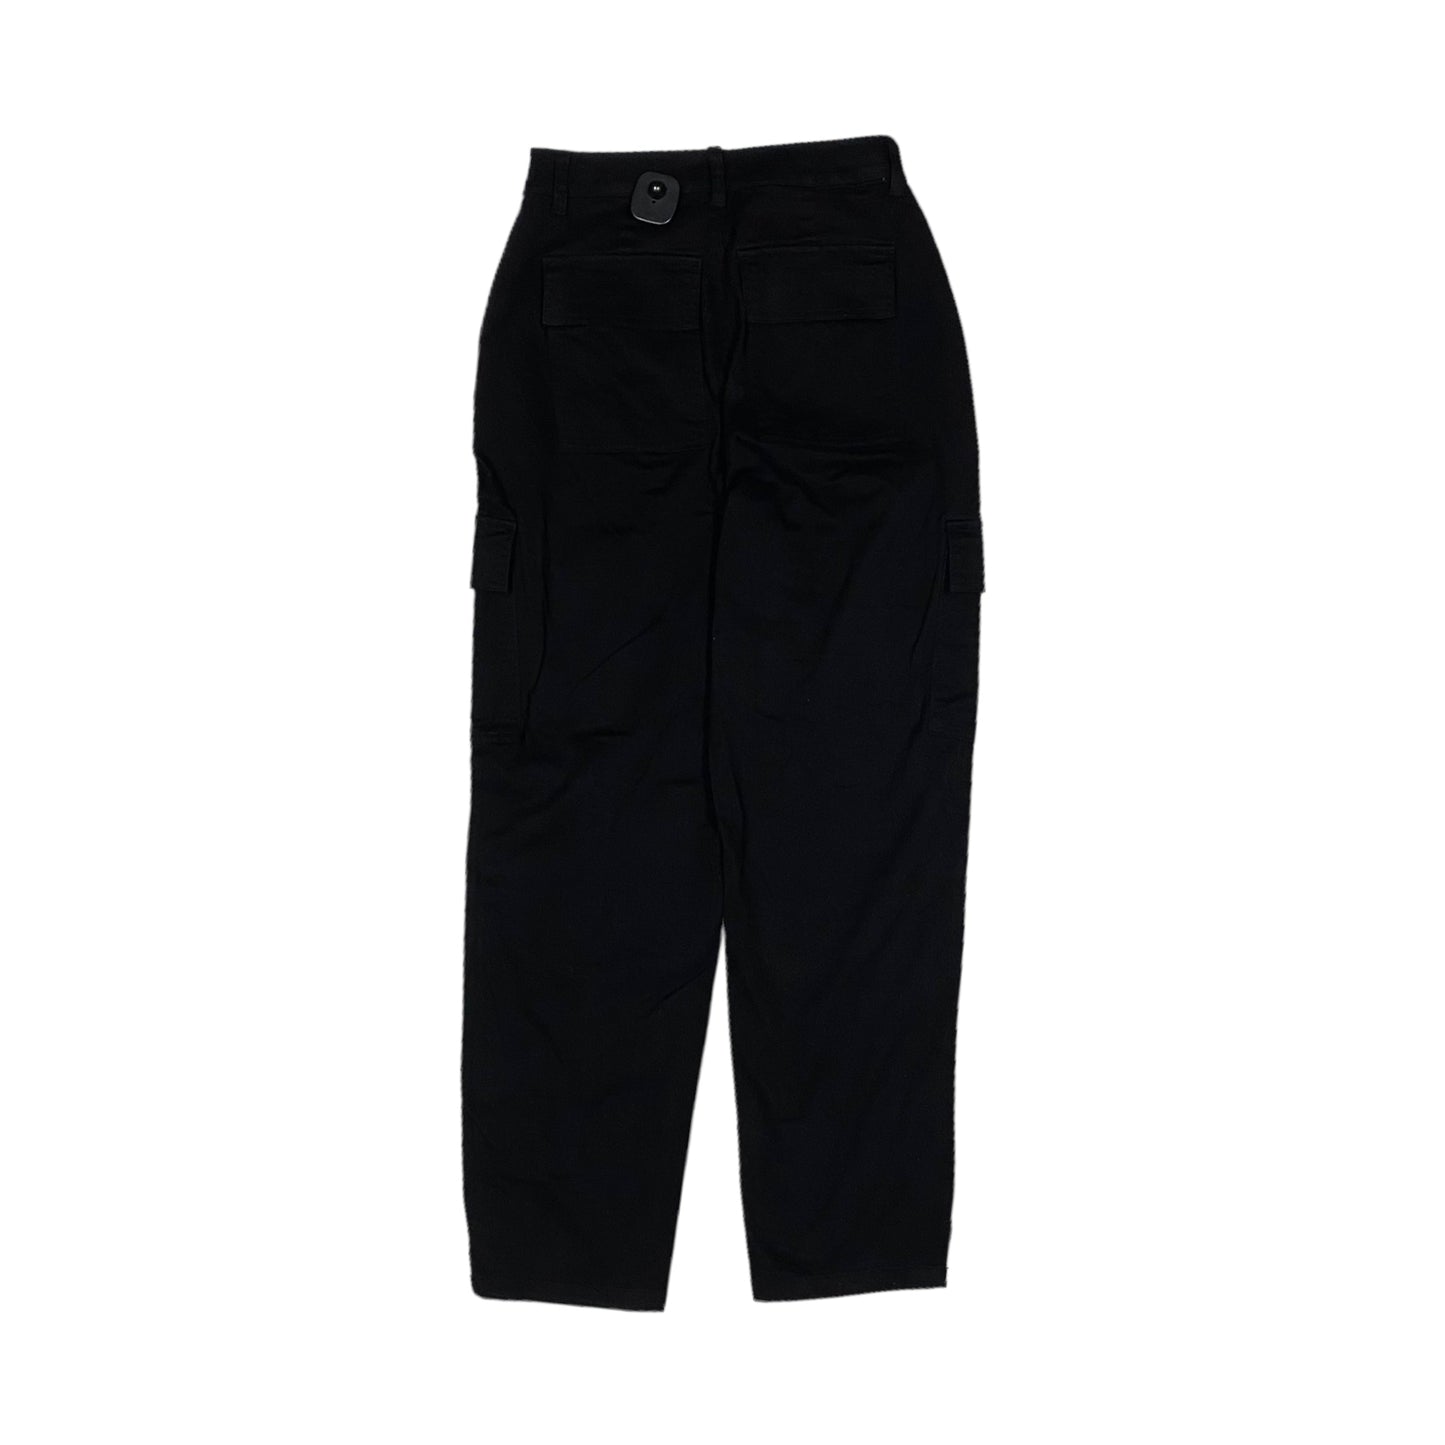 Pants Cargo & Utility By Universal Thread  Size: 4